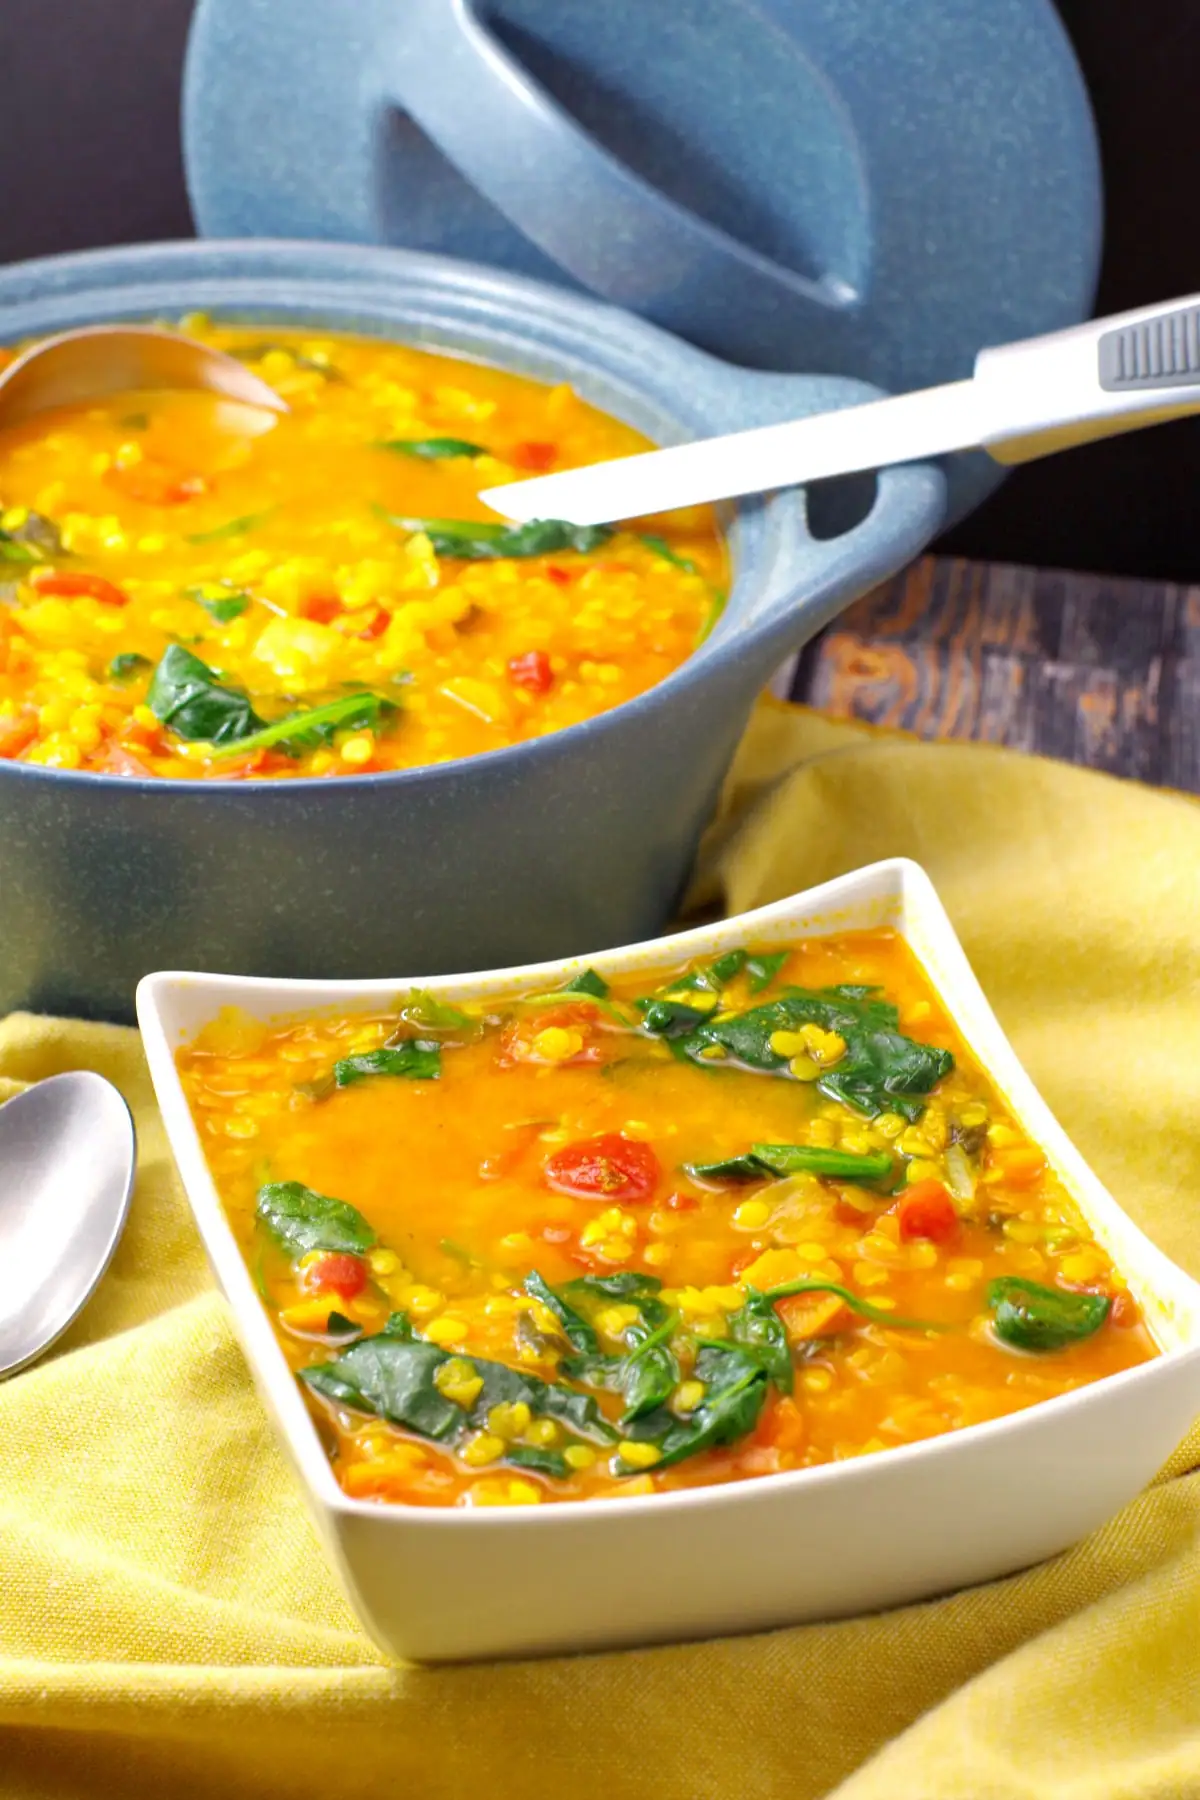 Red Lentil Spinach soup | Weight Watchers - foodmeanderings.com